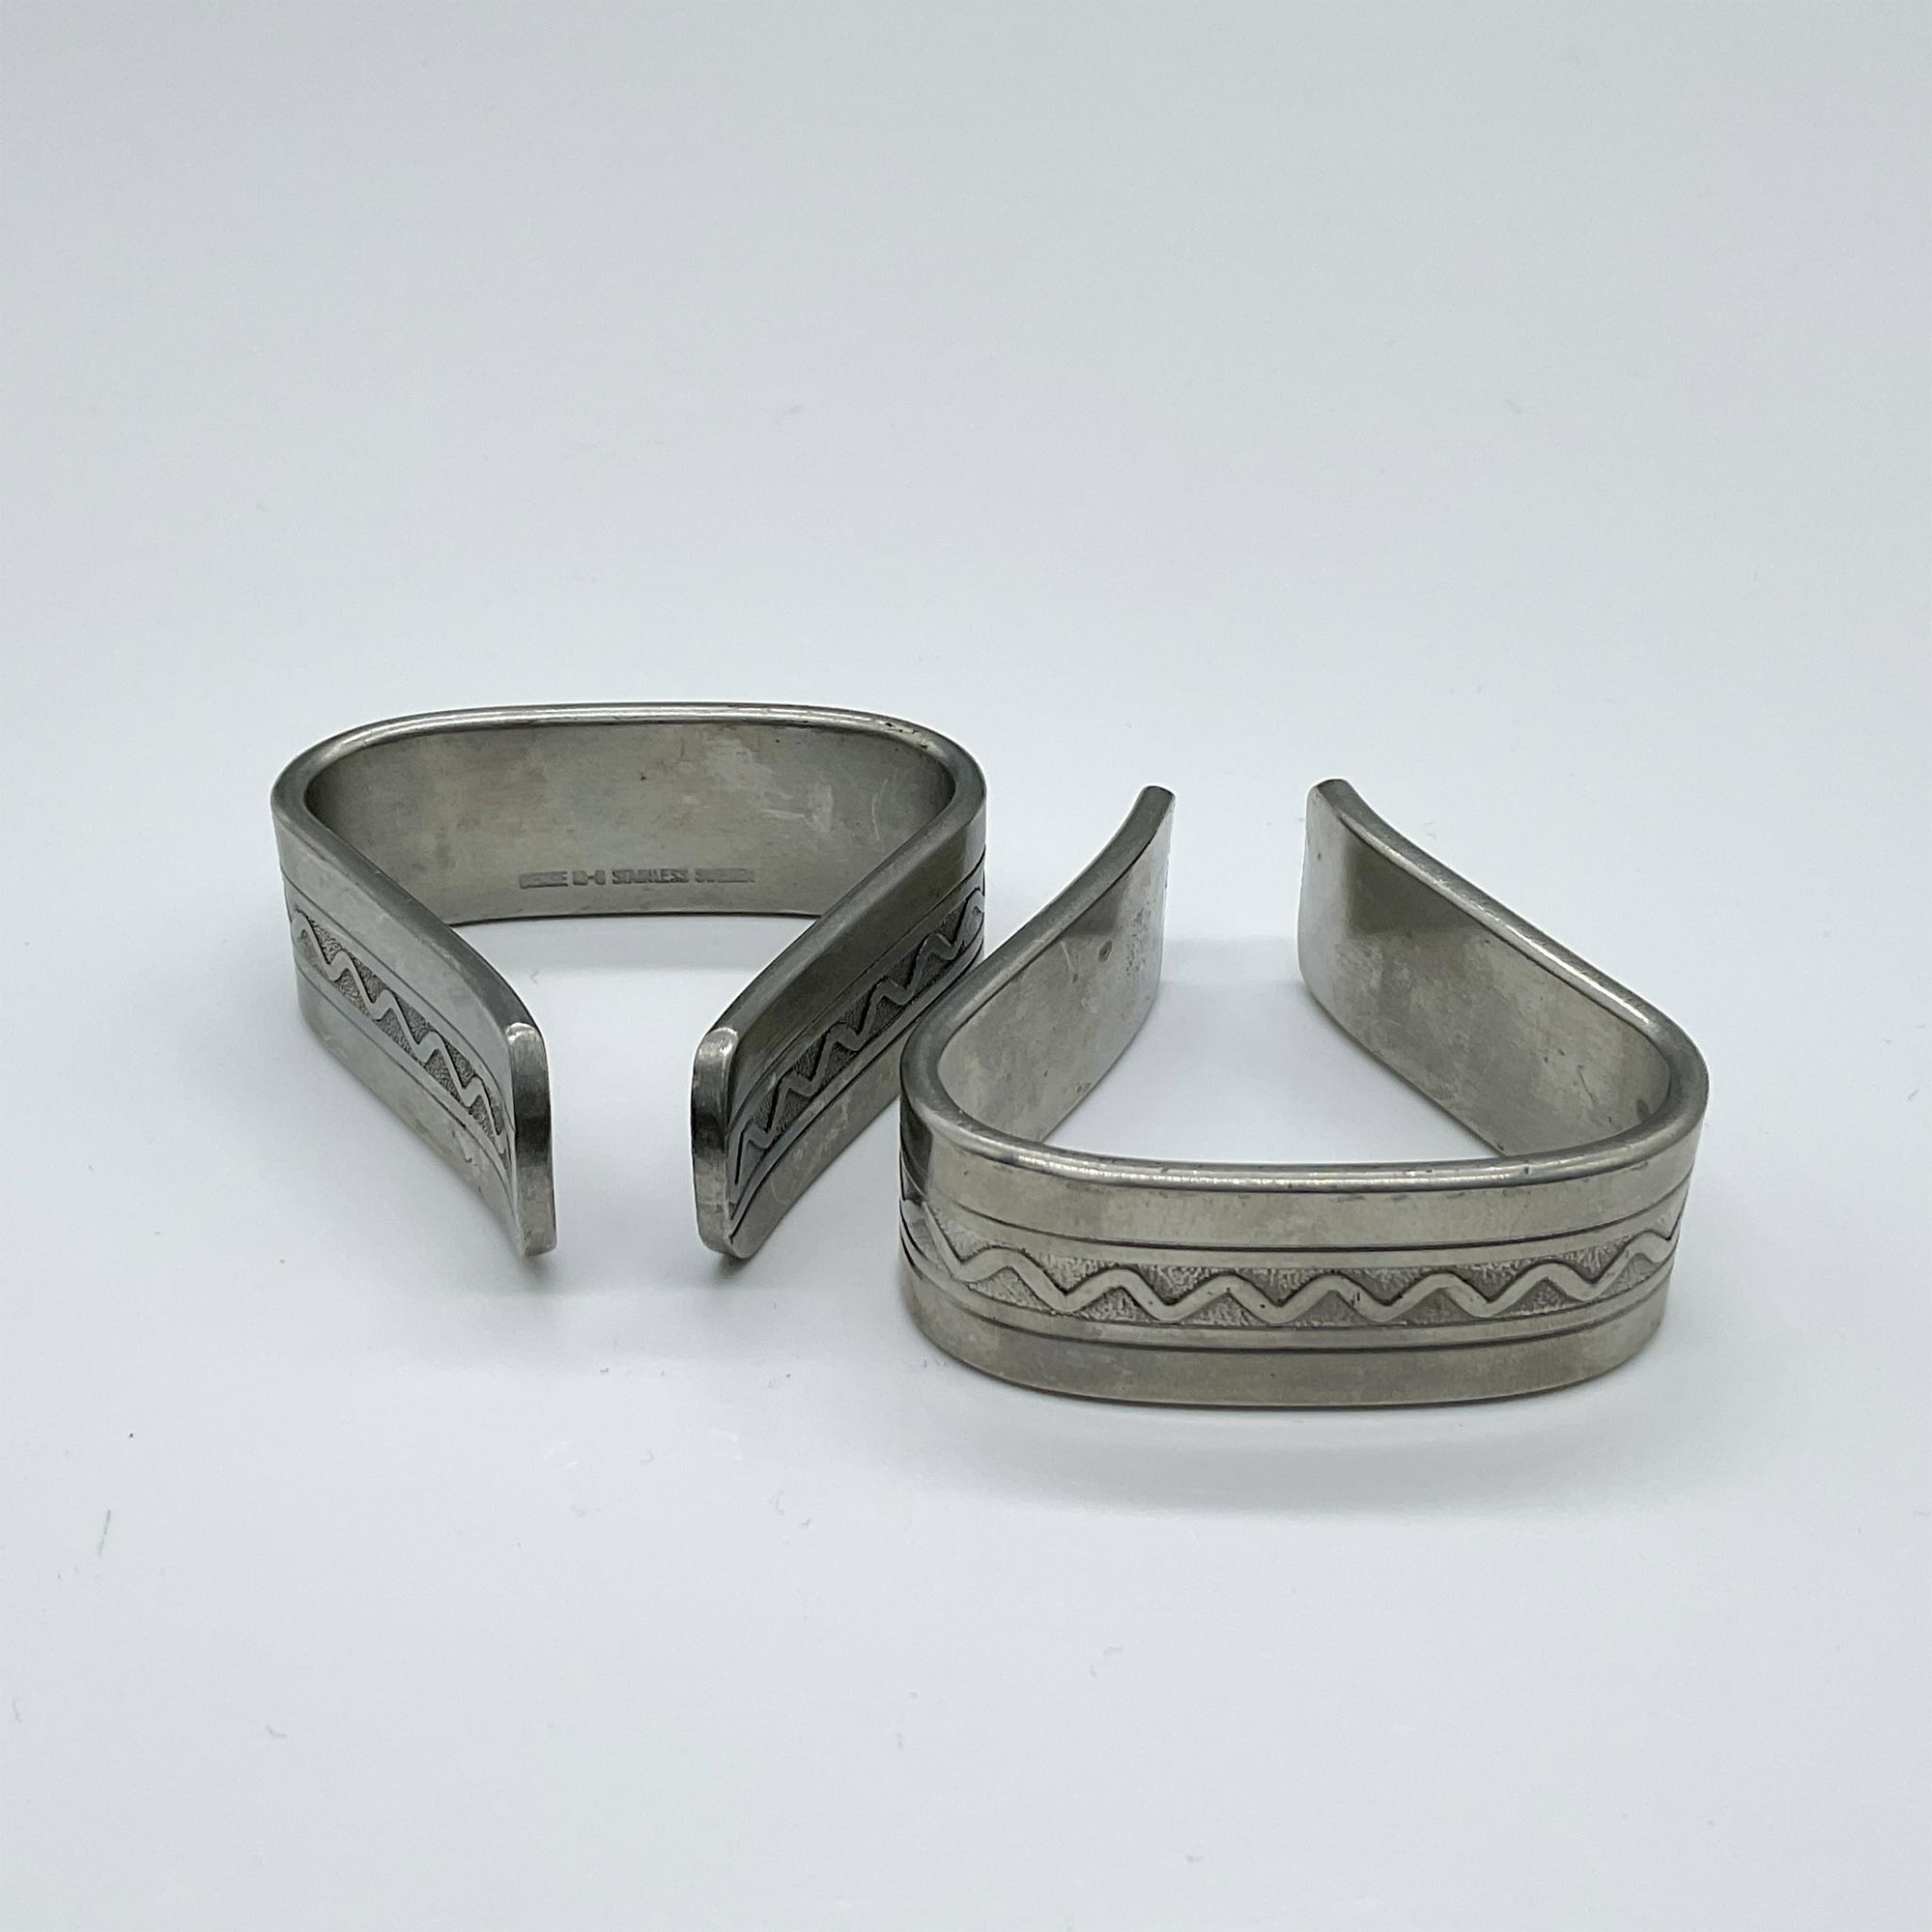 8pc Gense Stainless Steel Open Triangle Napkin Rings - Image 2 of 2